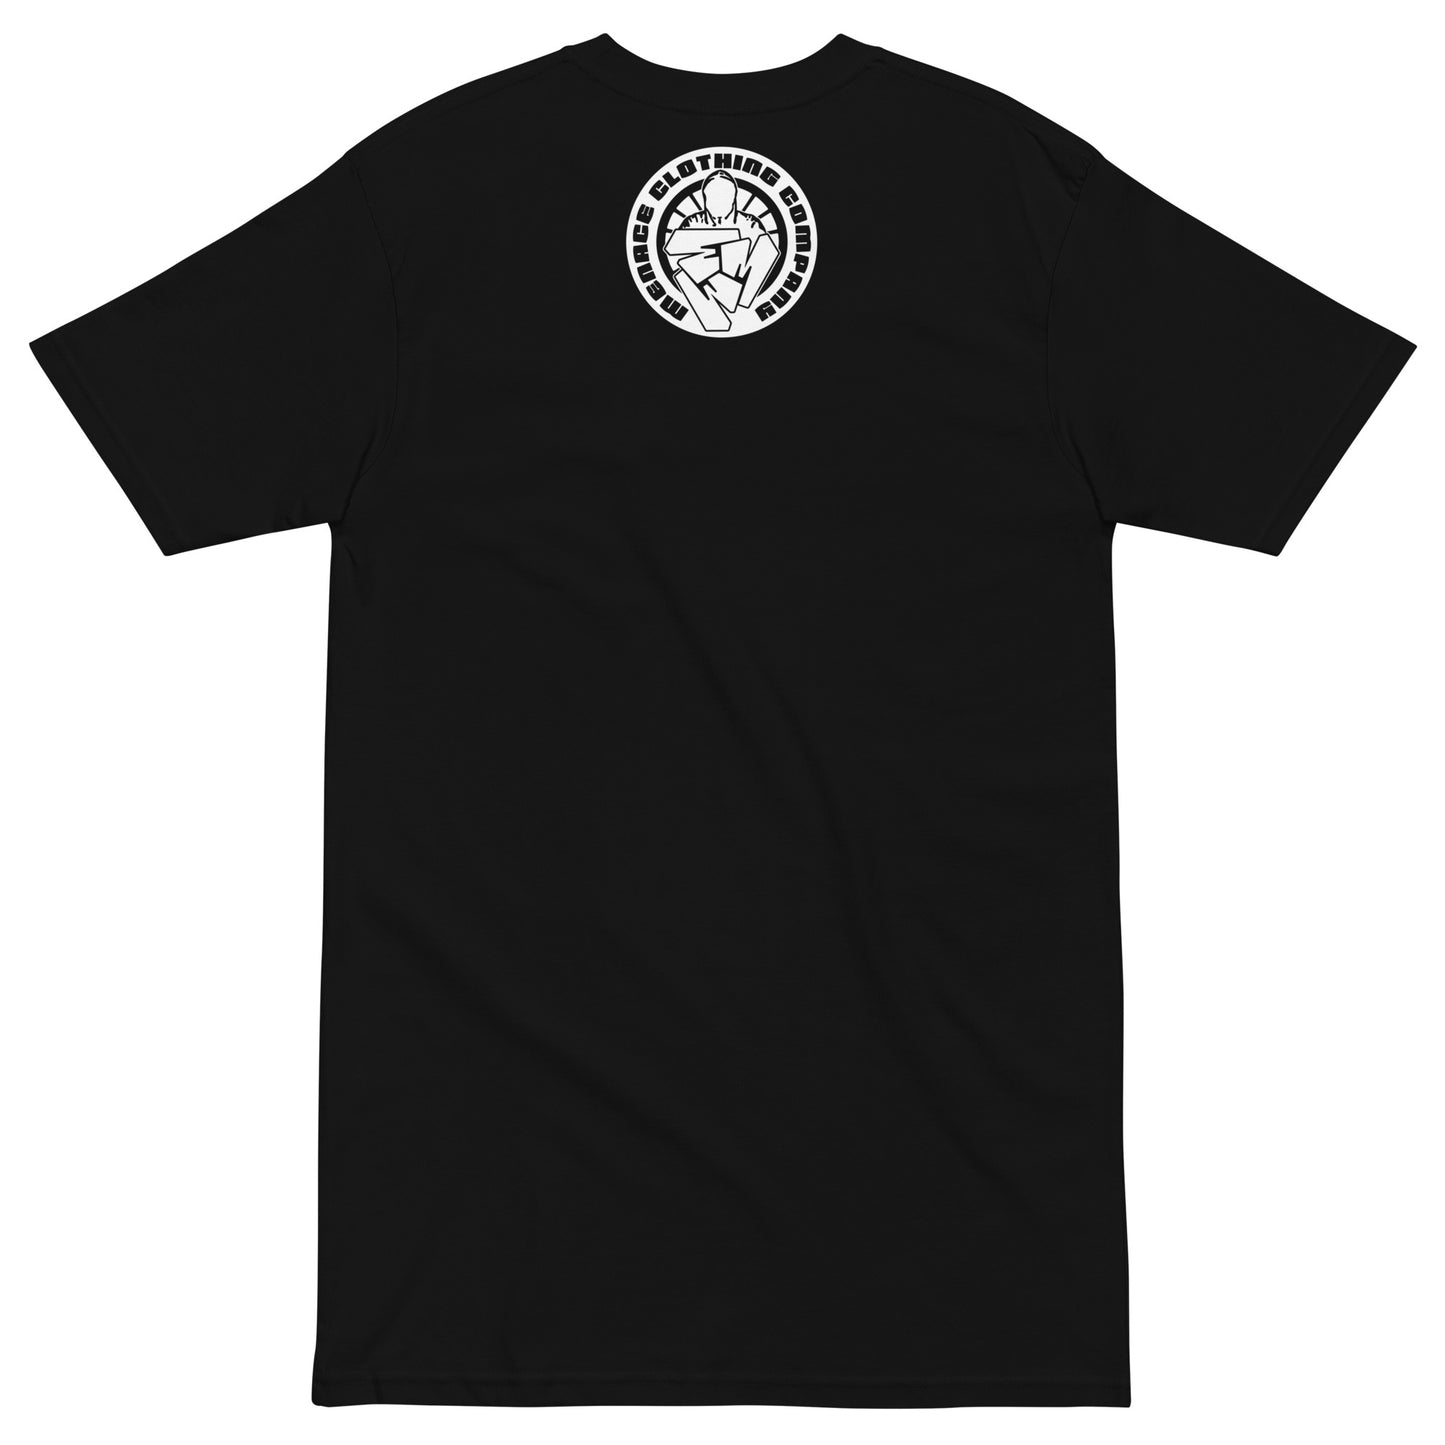 Back of Menace Clothing Working Class Shout Out T-Shirt. Black T-Shirt with Menace Clothing Co logo. Small M with Hooded silhouette on middle back of the t-shirt near collar.